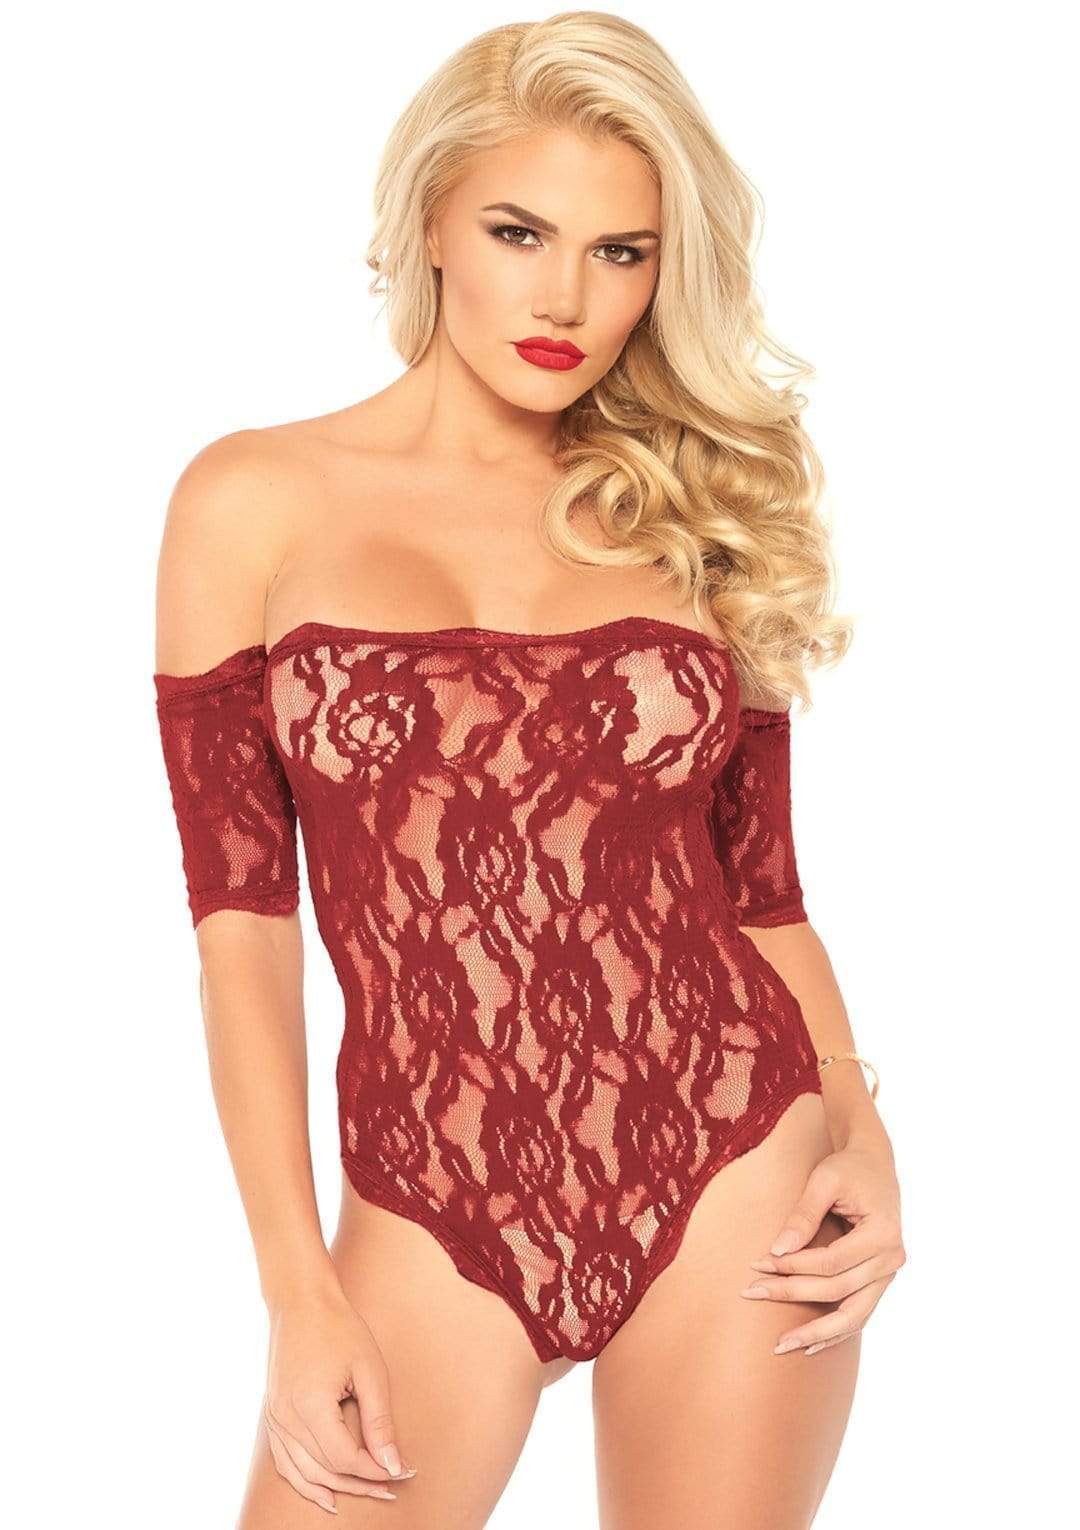 Strapless Lace Teddy